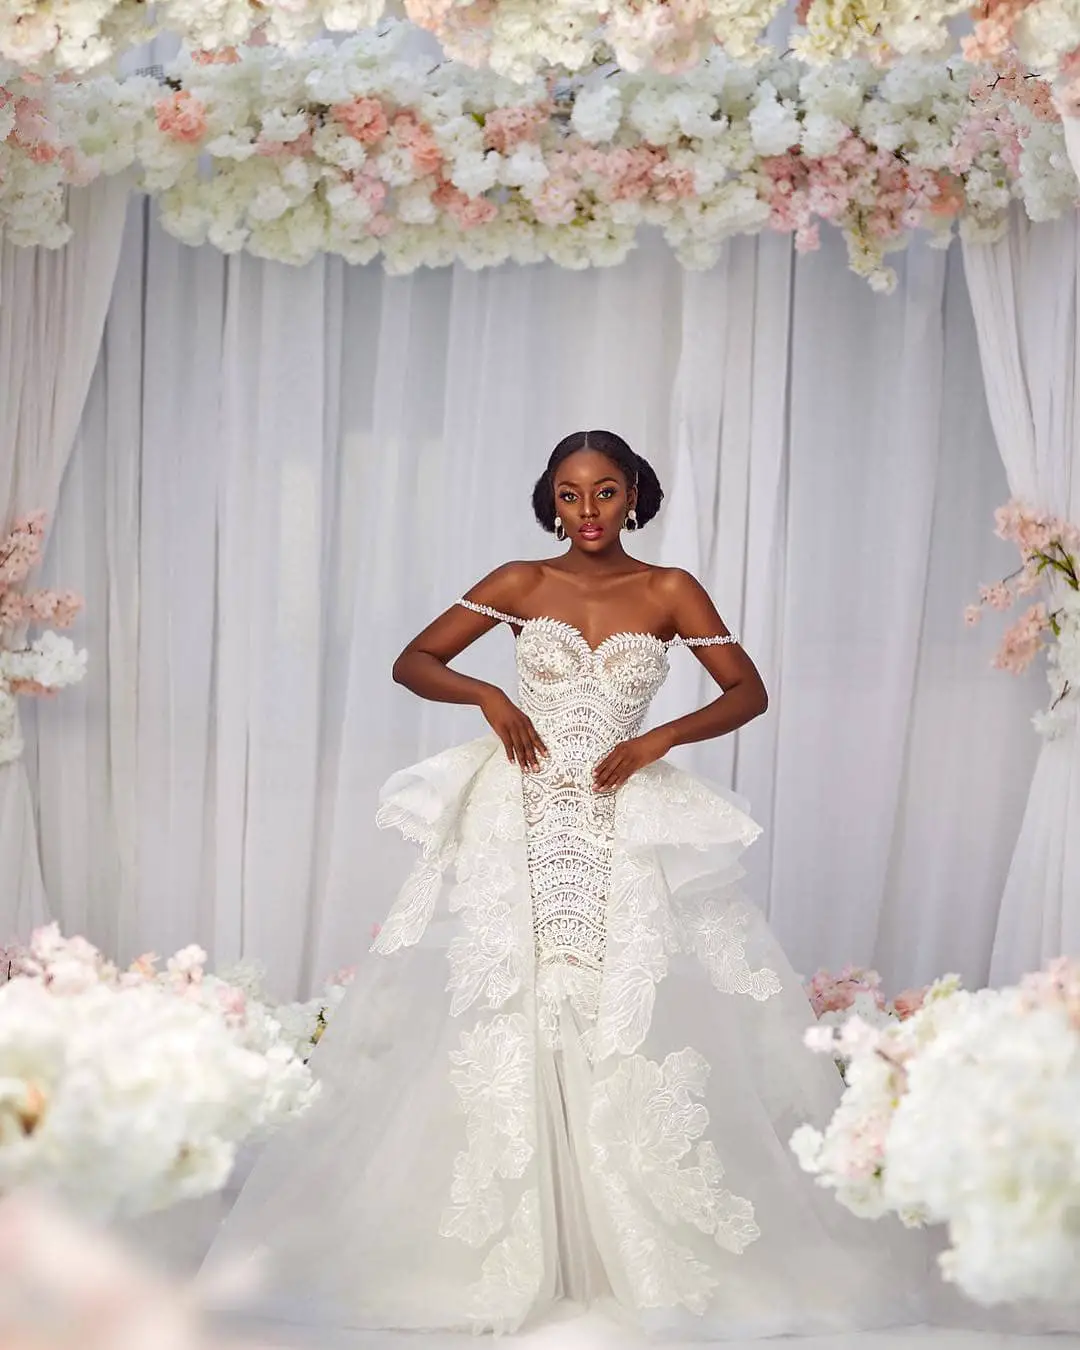 These Bomb Wedding Gowns Will Make You Want To Walk Down The Aisle!